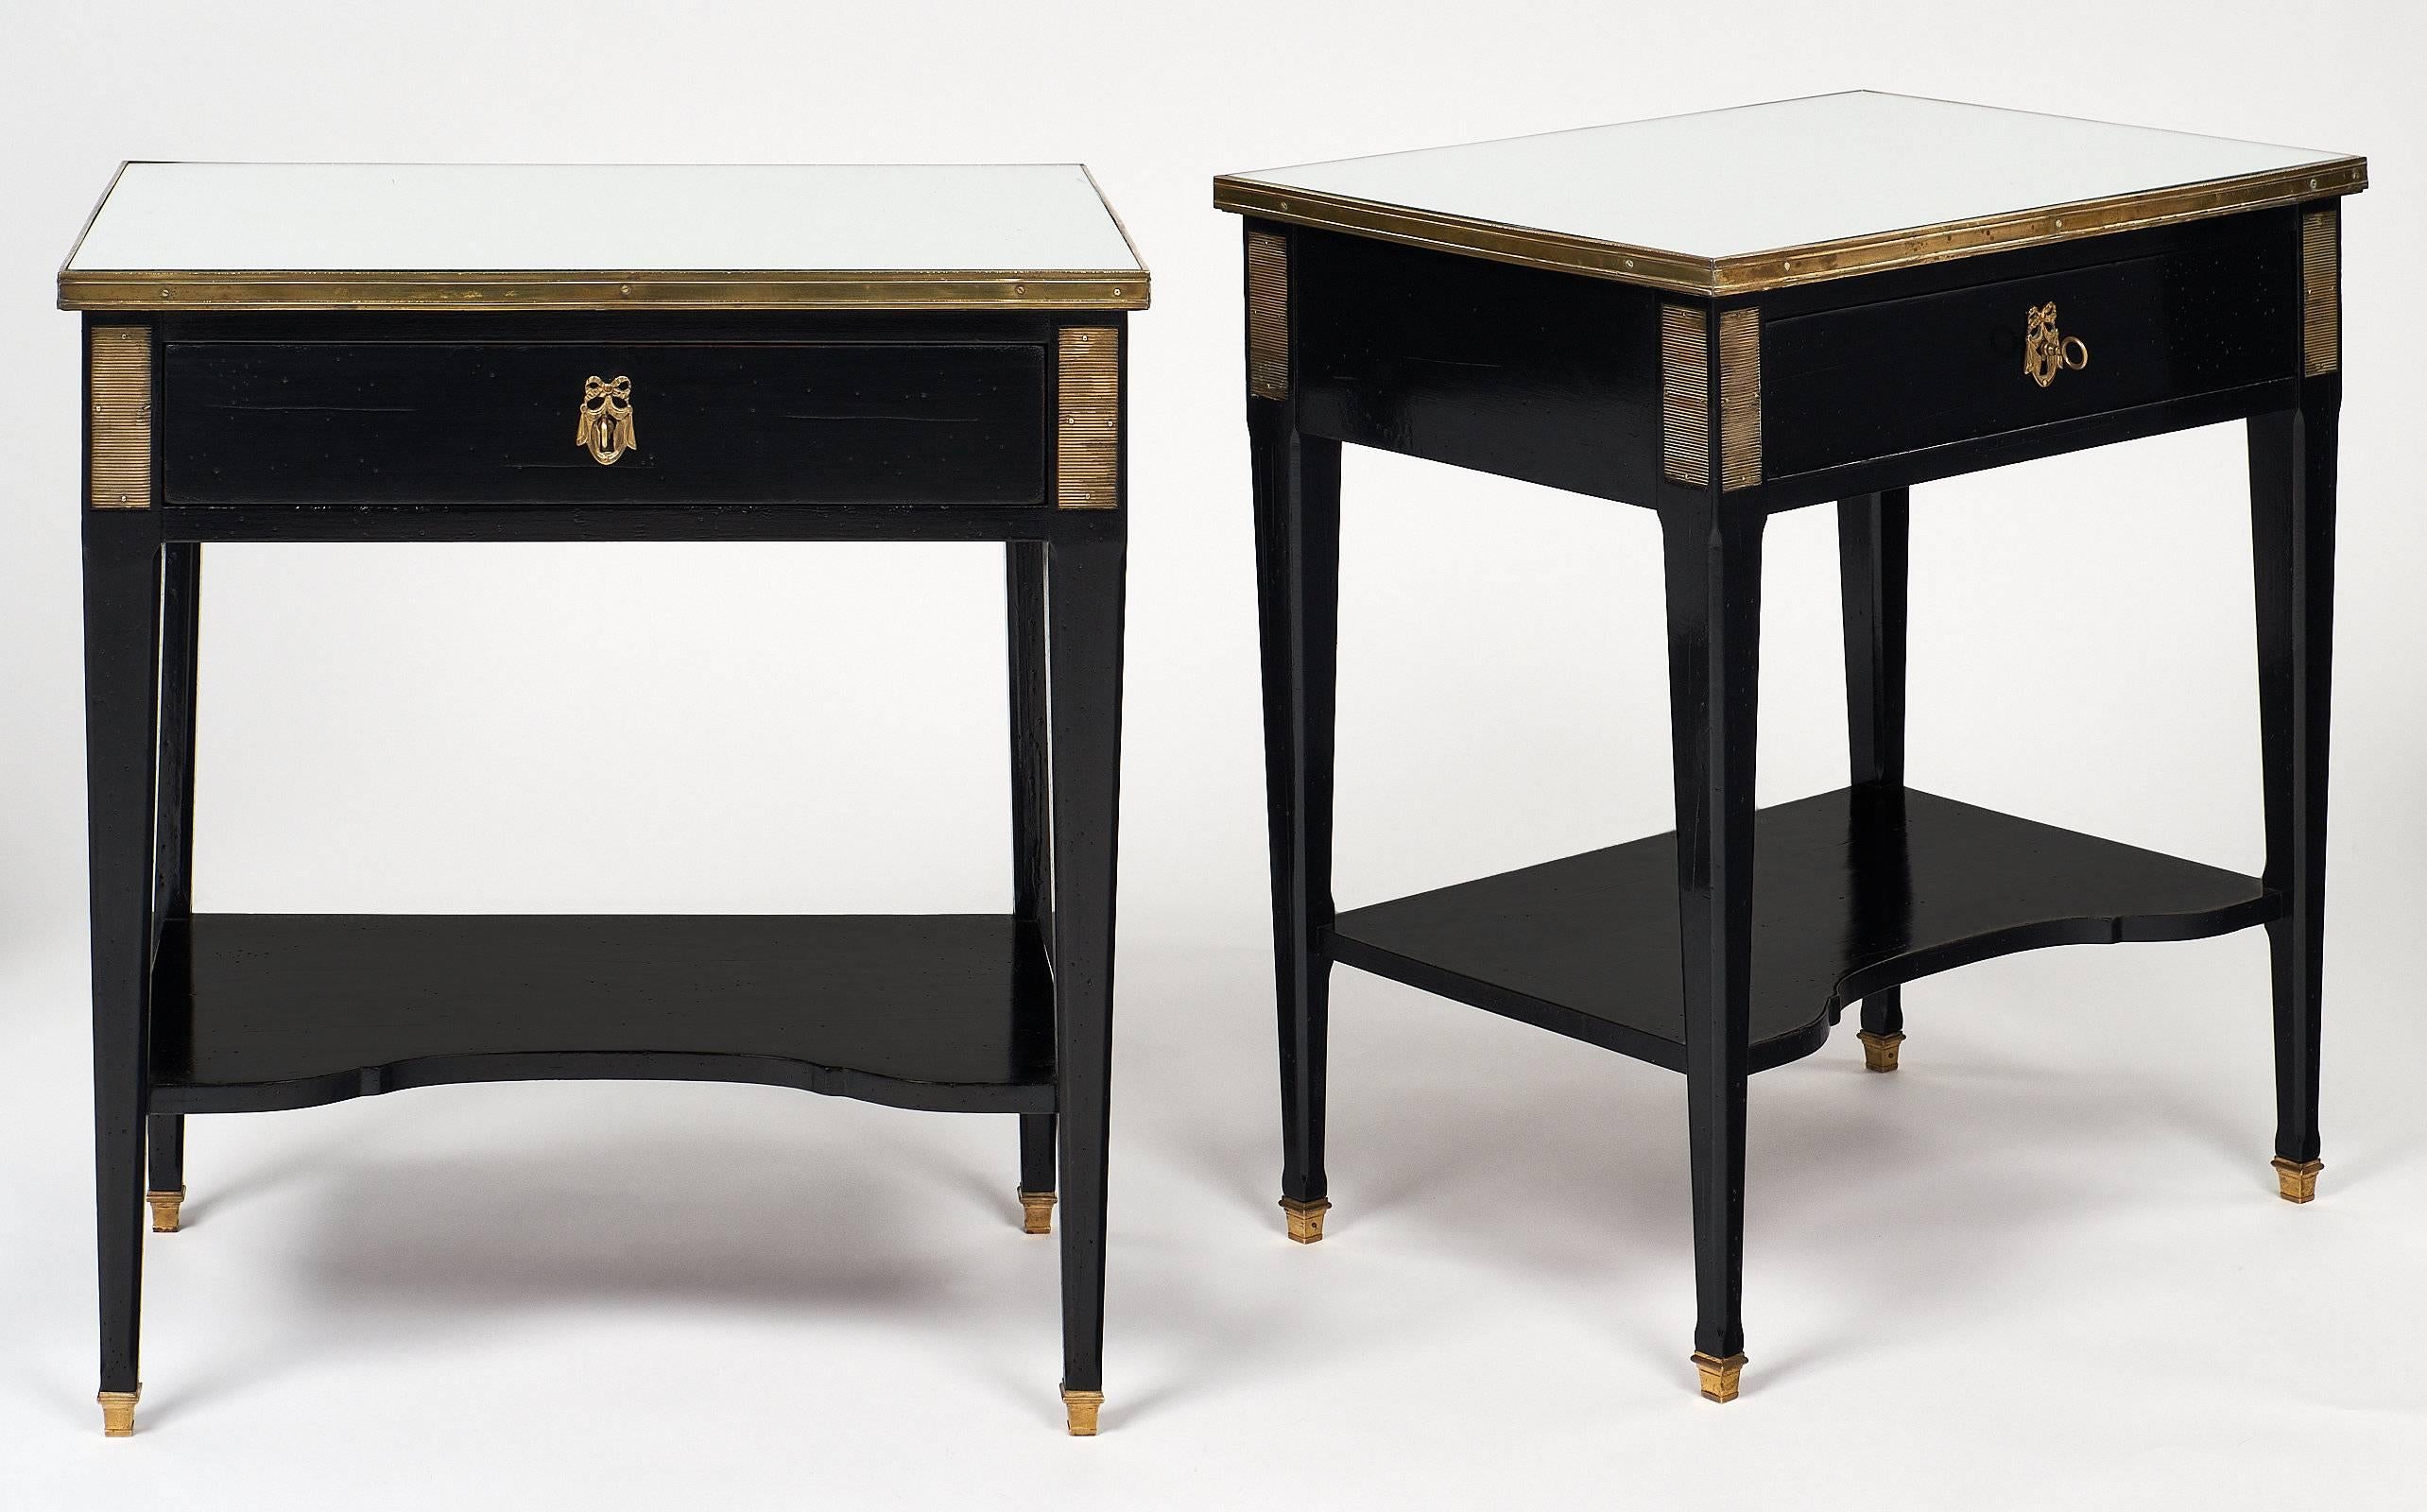 Beautiful Directoire style side tables topped with mirrors. Each table is trimmed with brass and features elegant finely cast brass hardware with working locks and keys. Each tapered leg is capped in brass. We love the great shape and details of